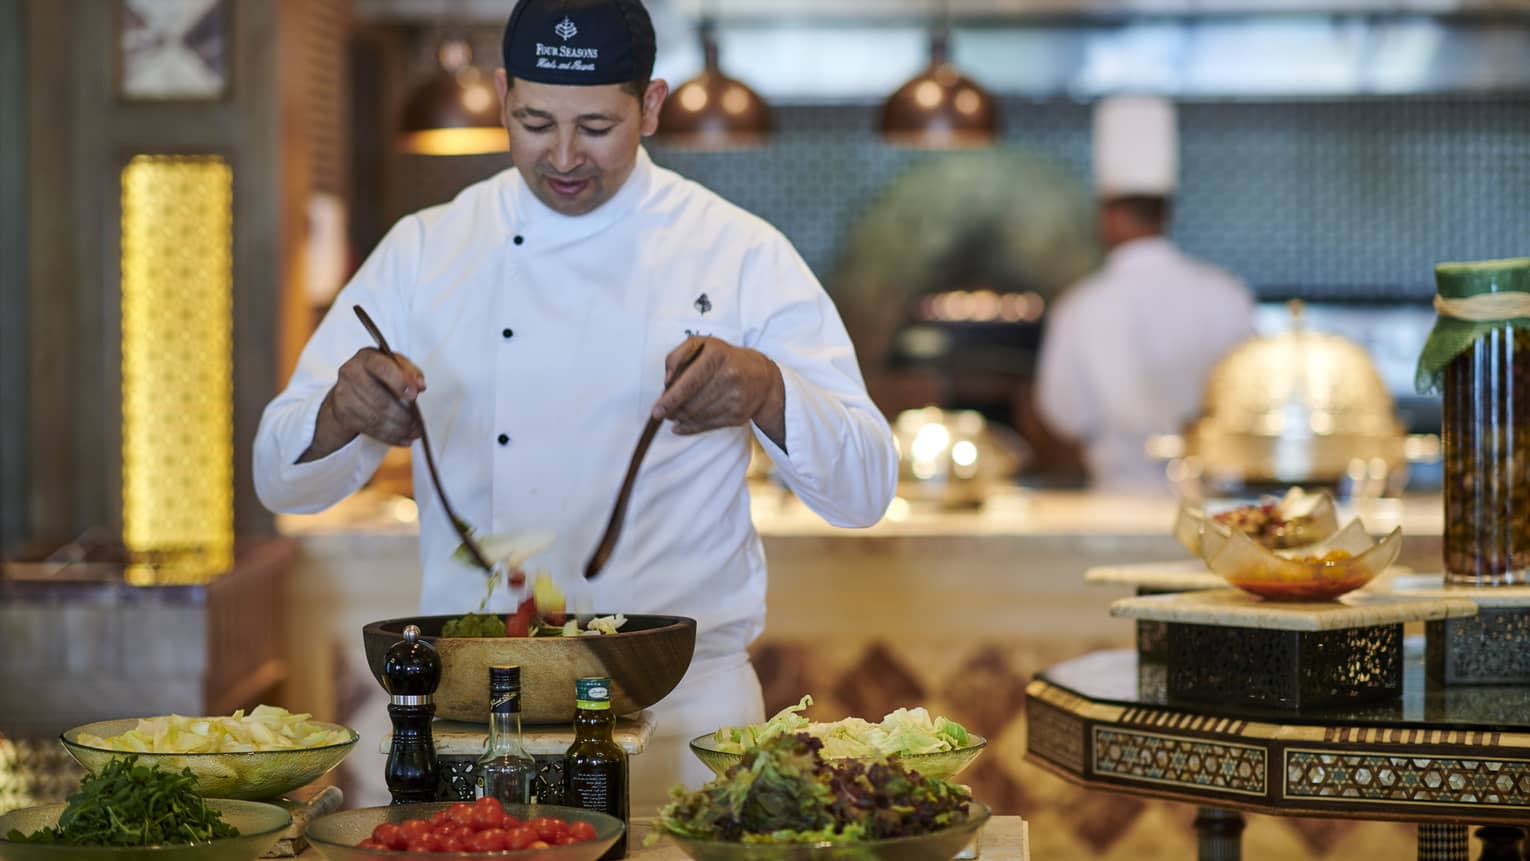 Chef tosses salad at buffet station with chopped vegetables in bowls